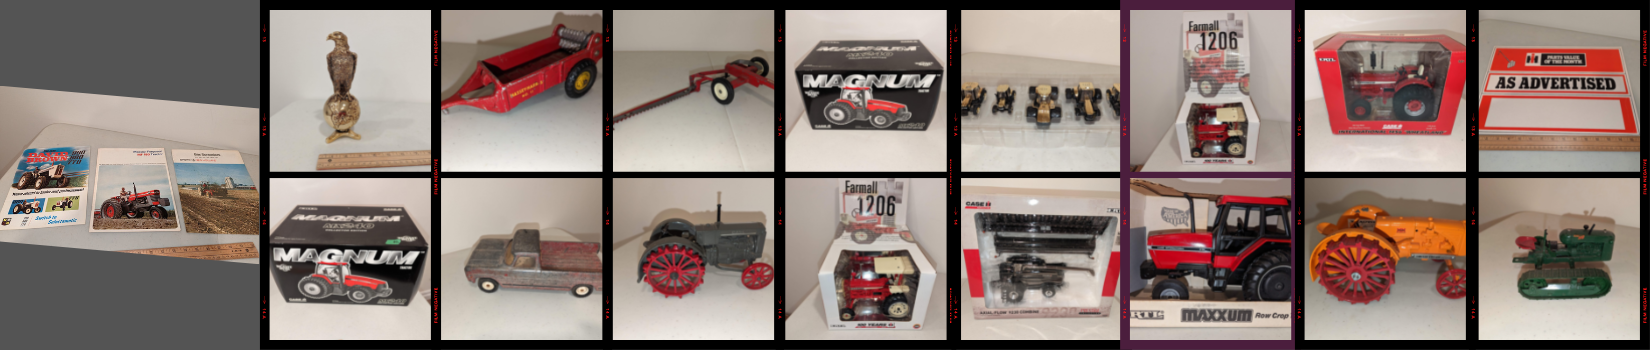 Online Collectible Auction Part 2, Farm Toys, Construction Toys, Literature, Buyers Guides, Posters, Memorabilia and other Collectibles